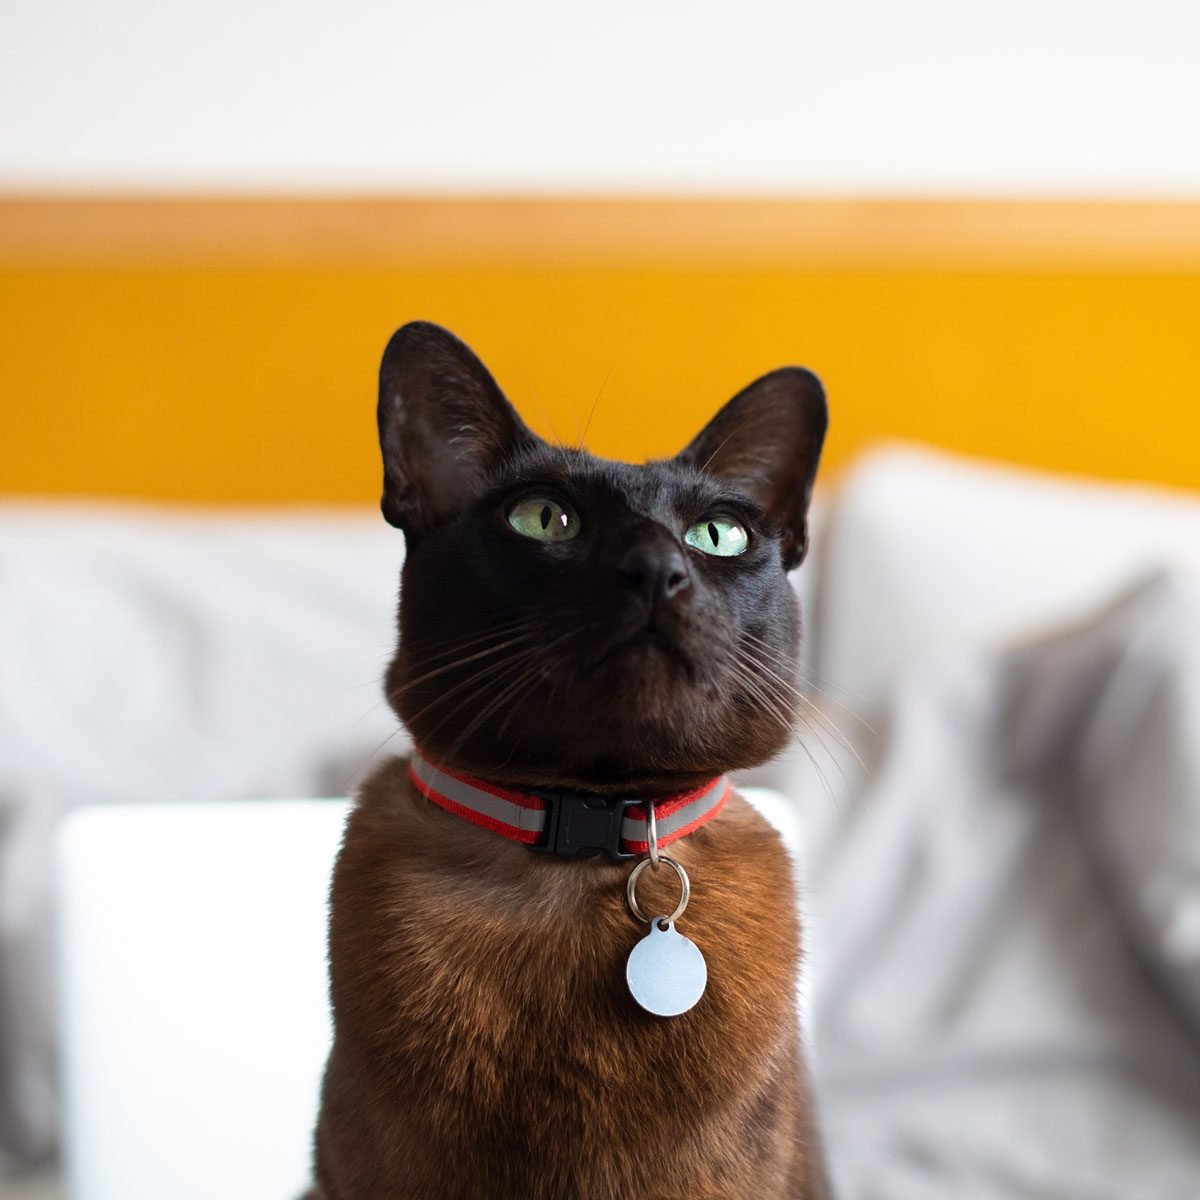 Should You Get a Collar for Your Cat?